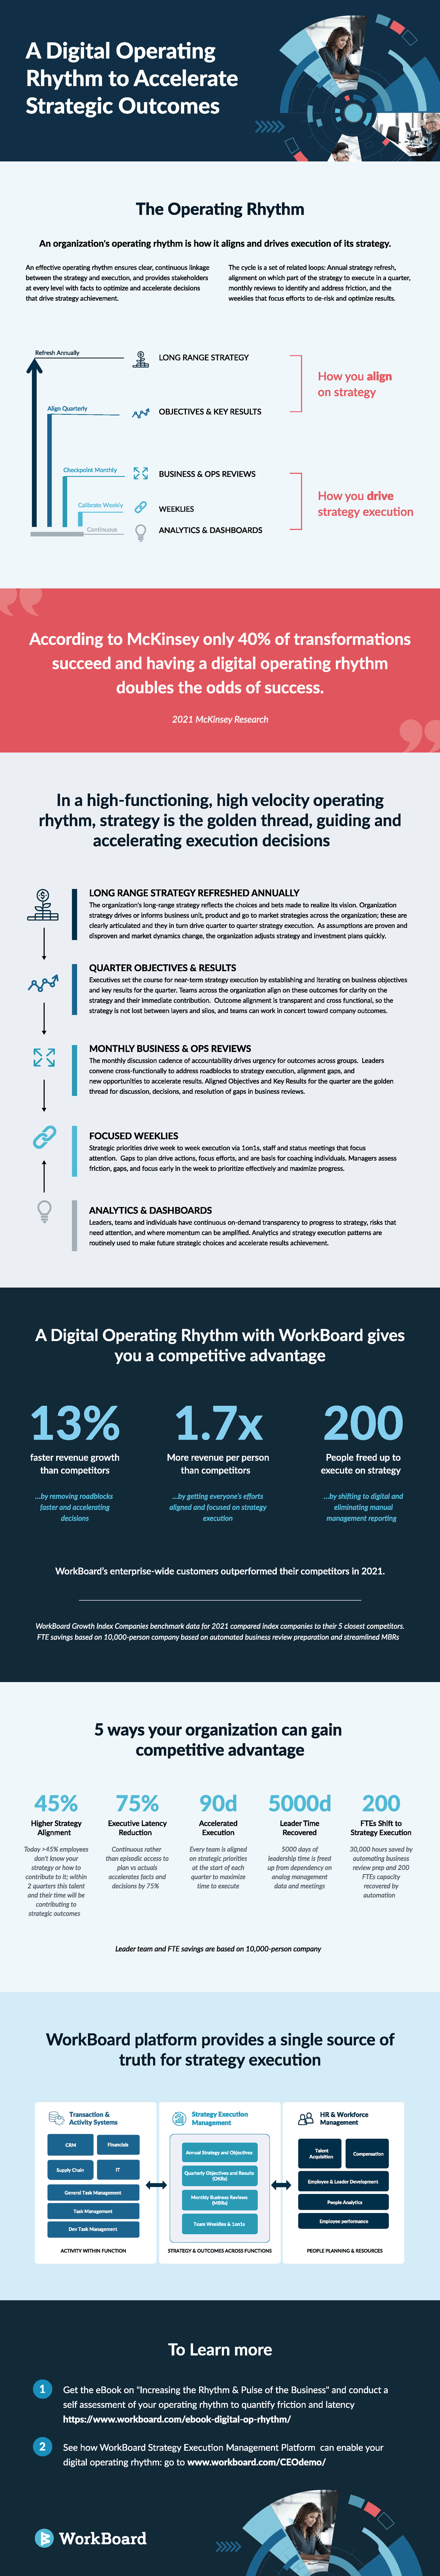 Infographic: A Digital Operating Rhythm to Accelerate Strategic Outcomes